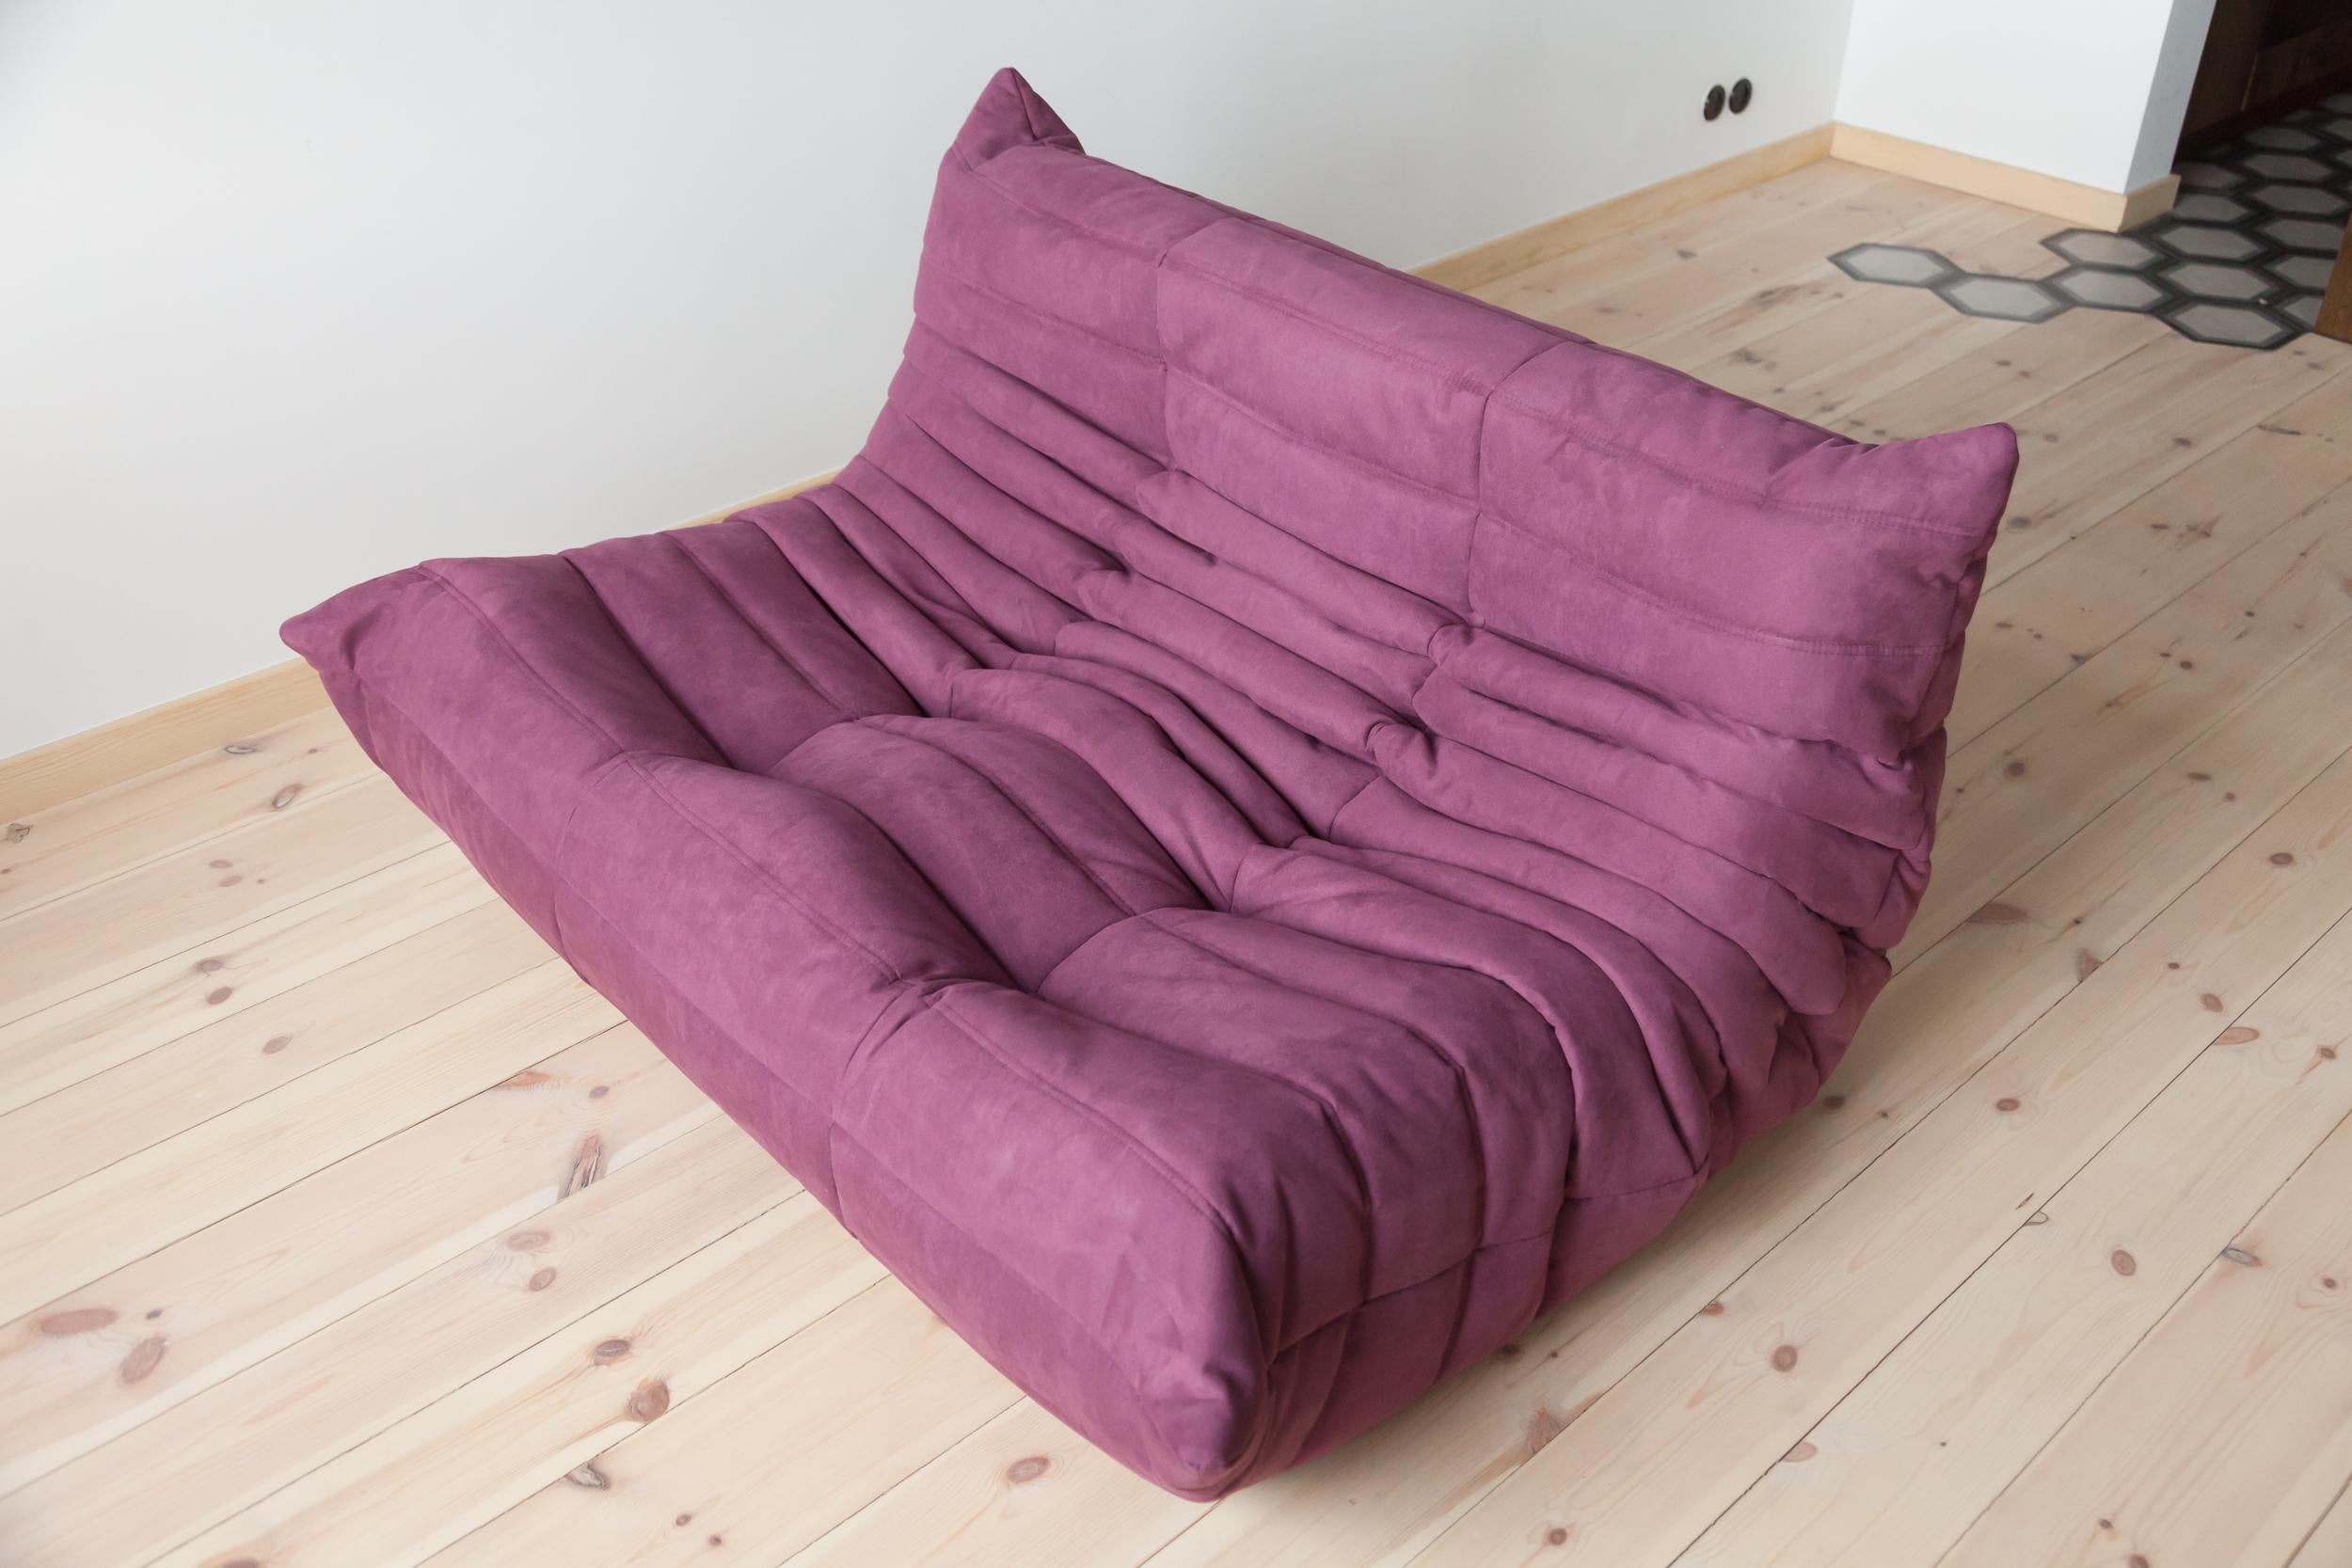 Mid-Century Modern Togo 2-Seat Sofa in Aubergine Microfibre by Michel Ducaroy for Ligne Roset For Sale